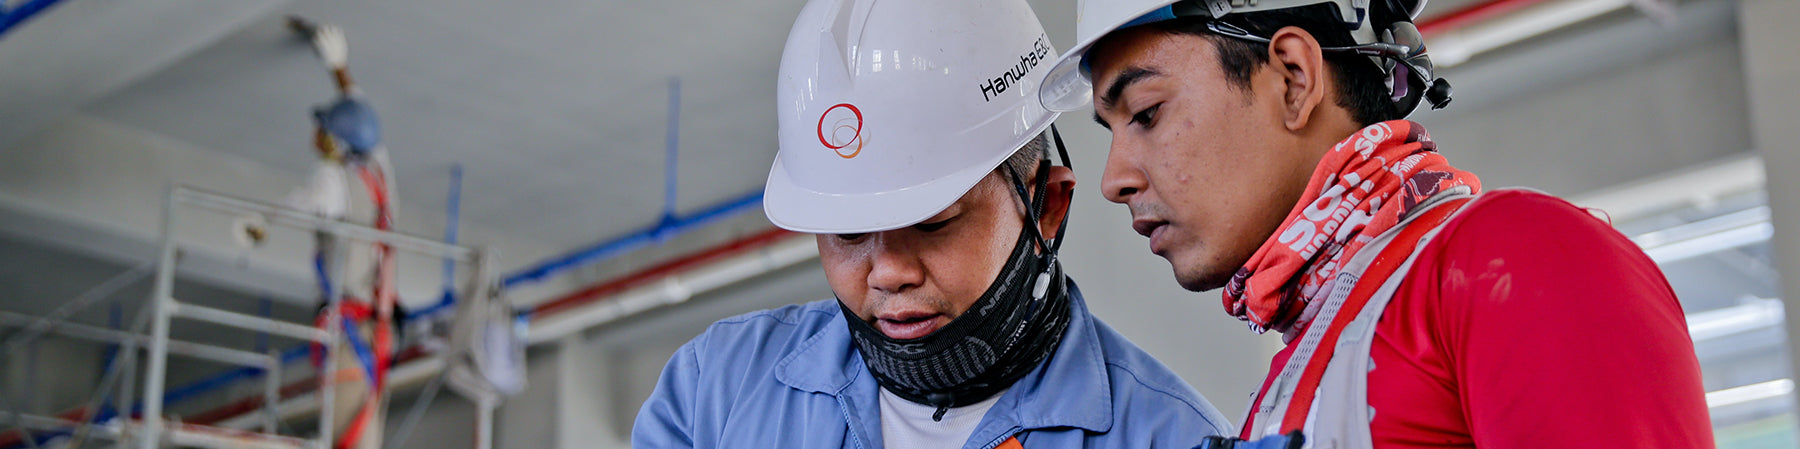 Two people wearing white hardhats look at paper at a construction site.